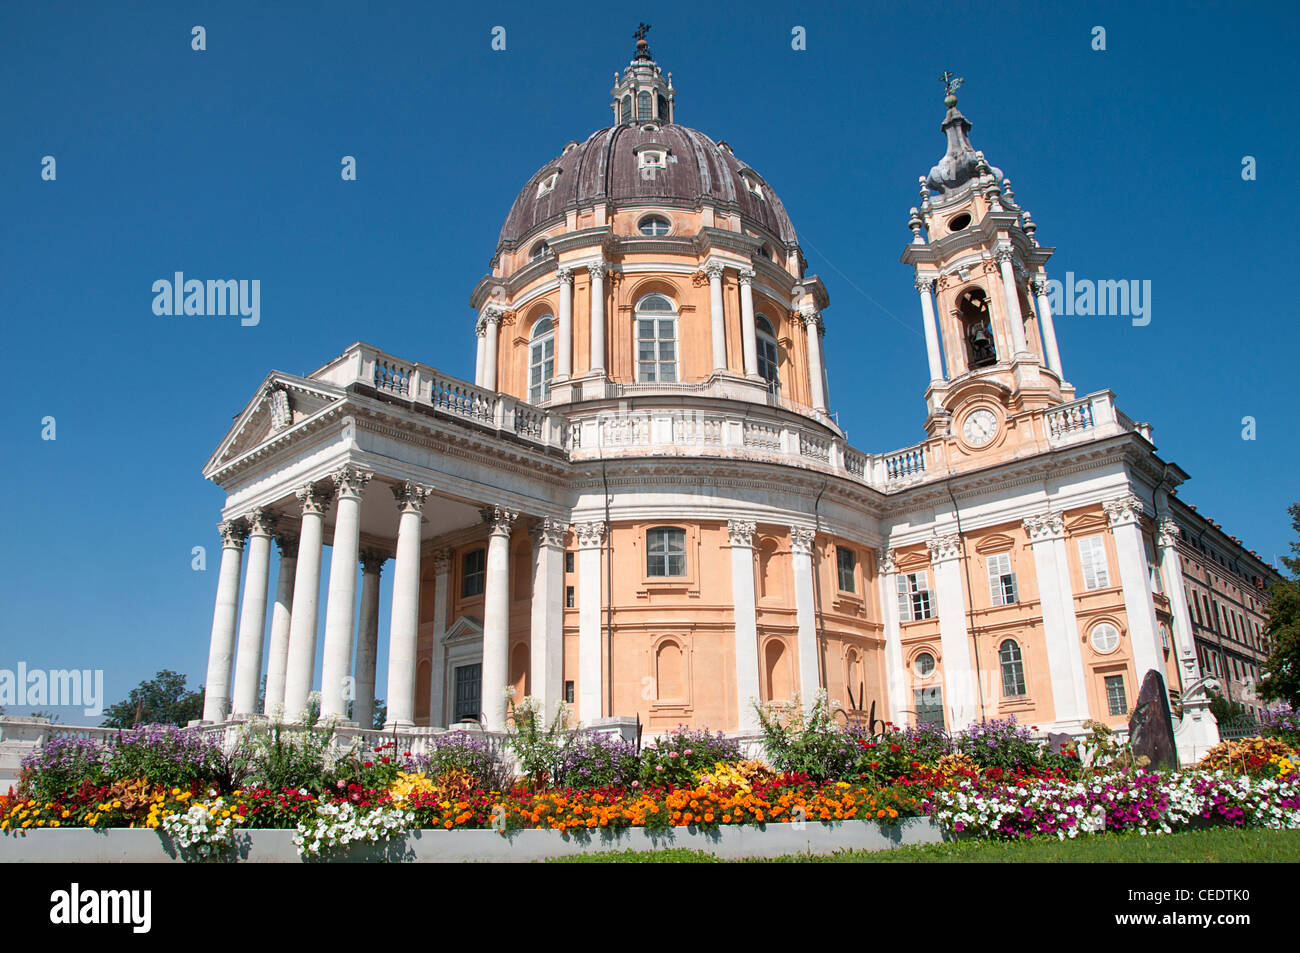 Italy, Piedmont, Turin, Basilica di Superga with flowering garden in foreground Stock Photo